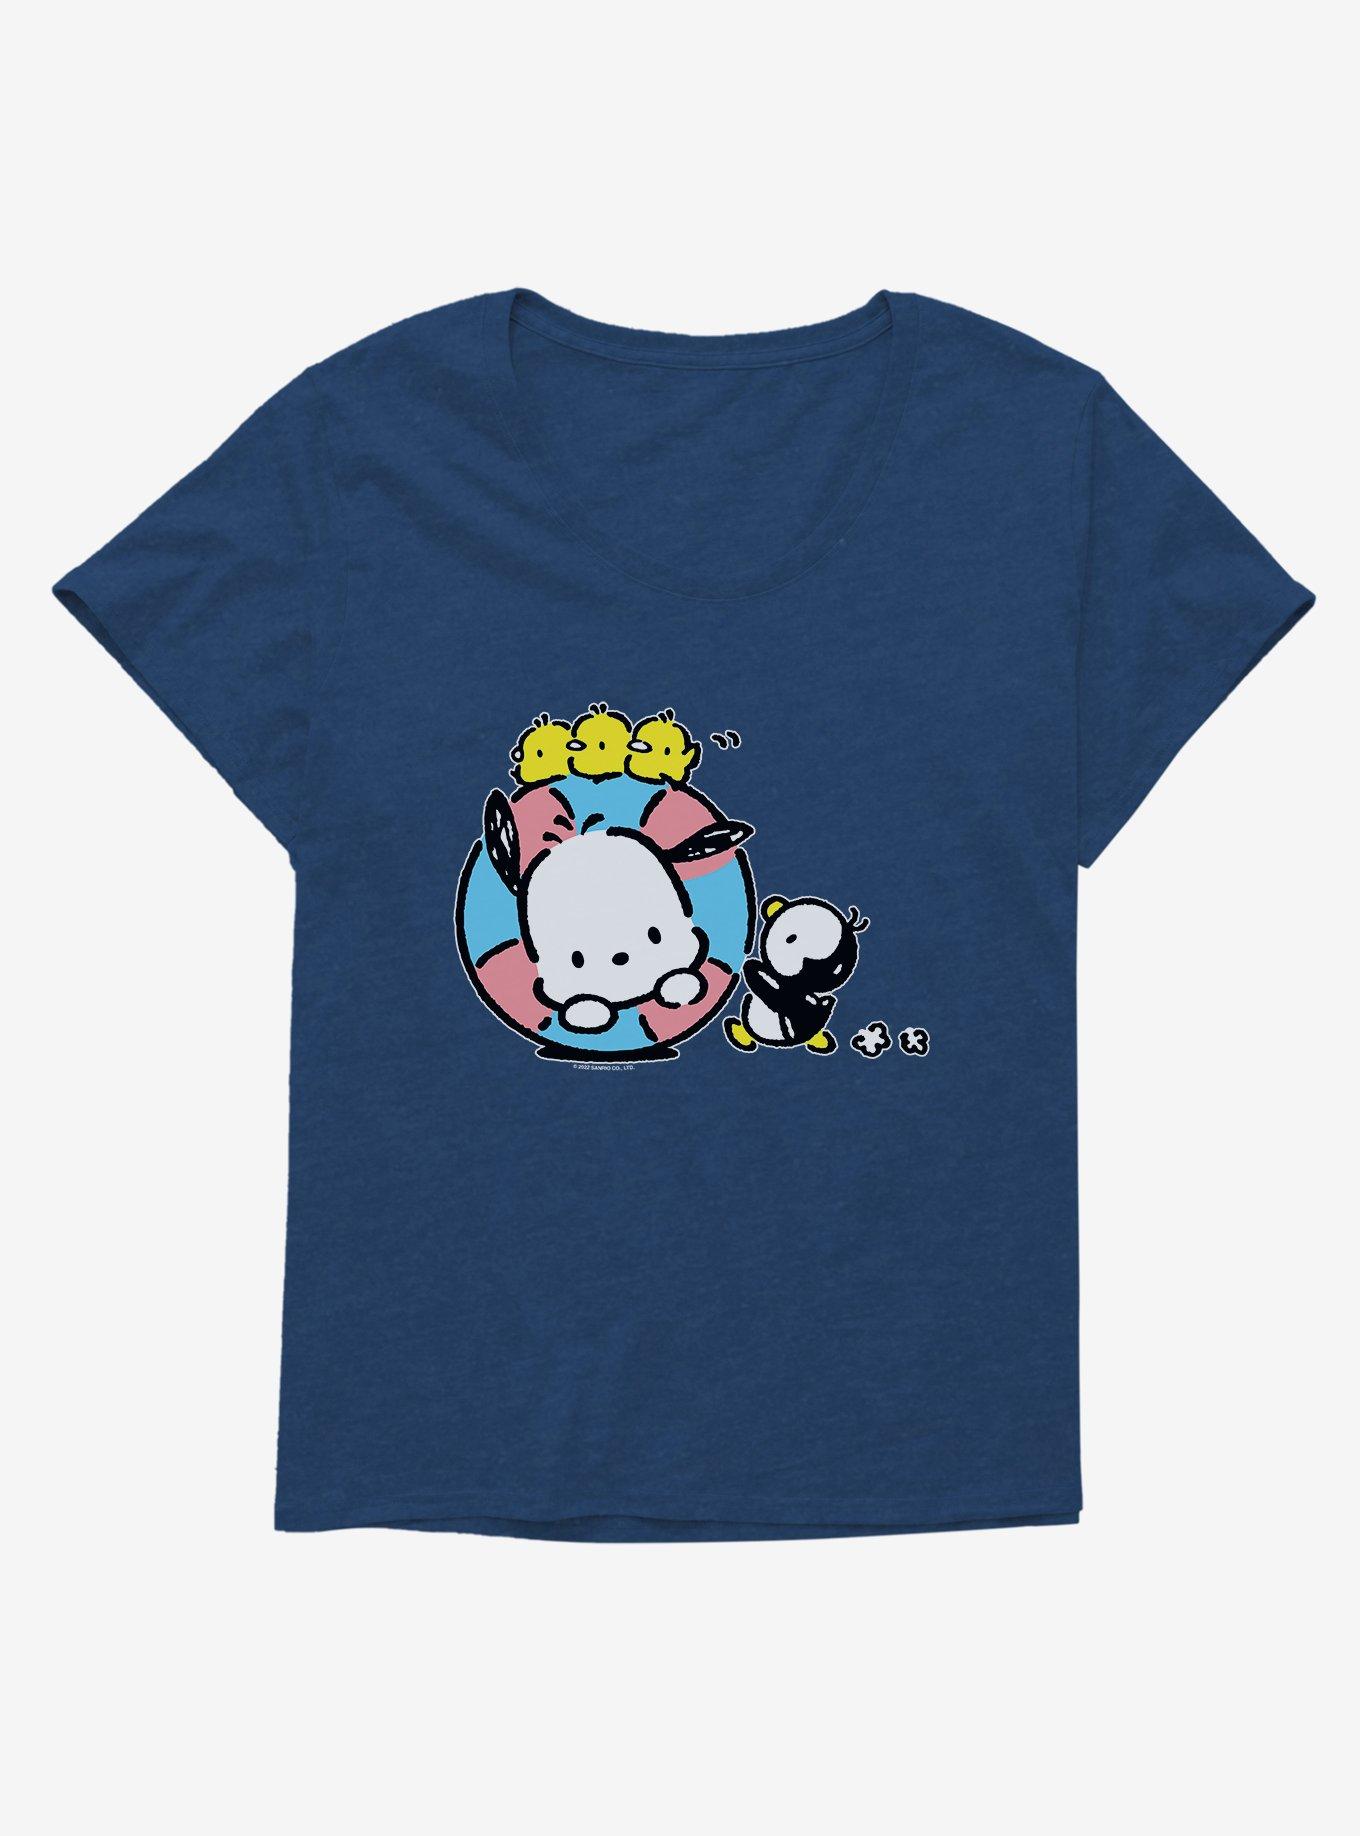 Pochacco Swimming With Friends Girls T-Shirt Plus